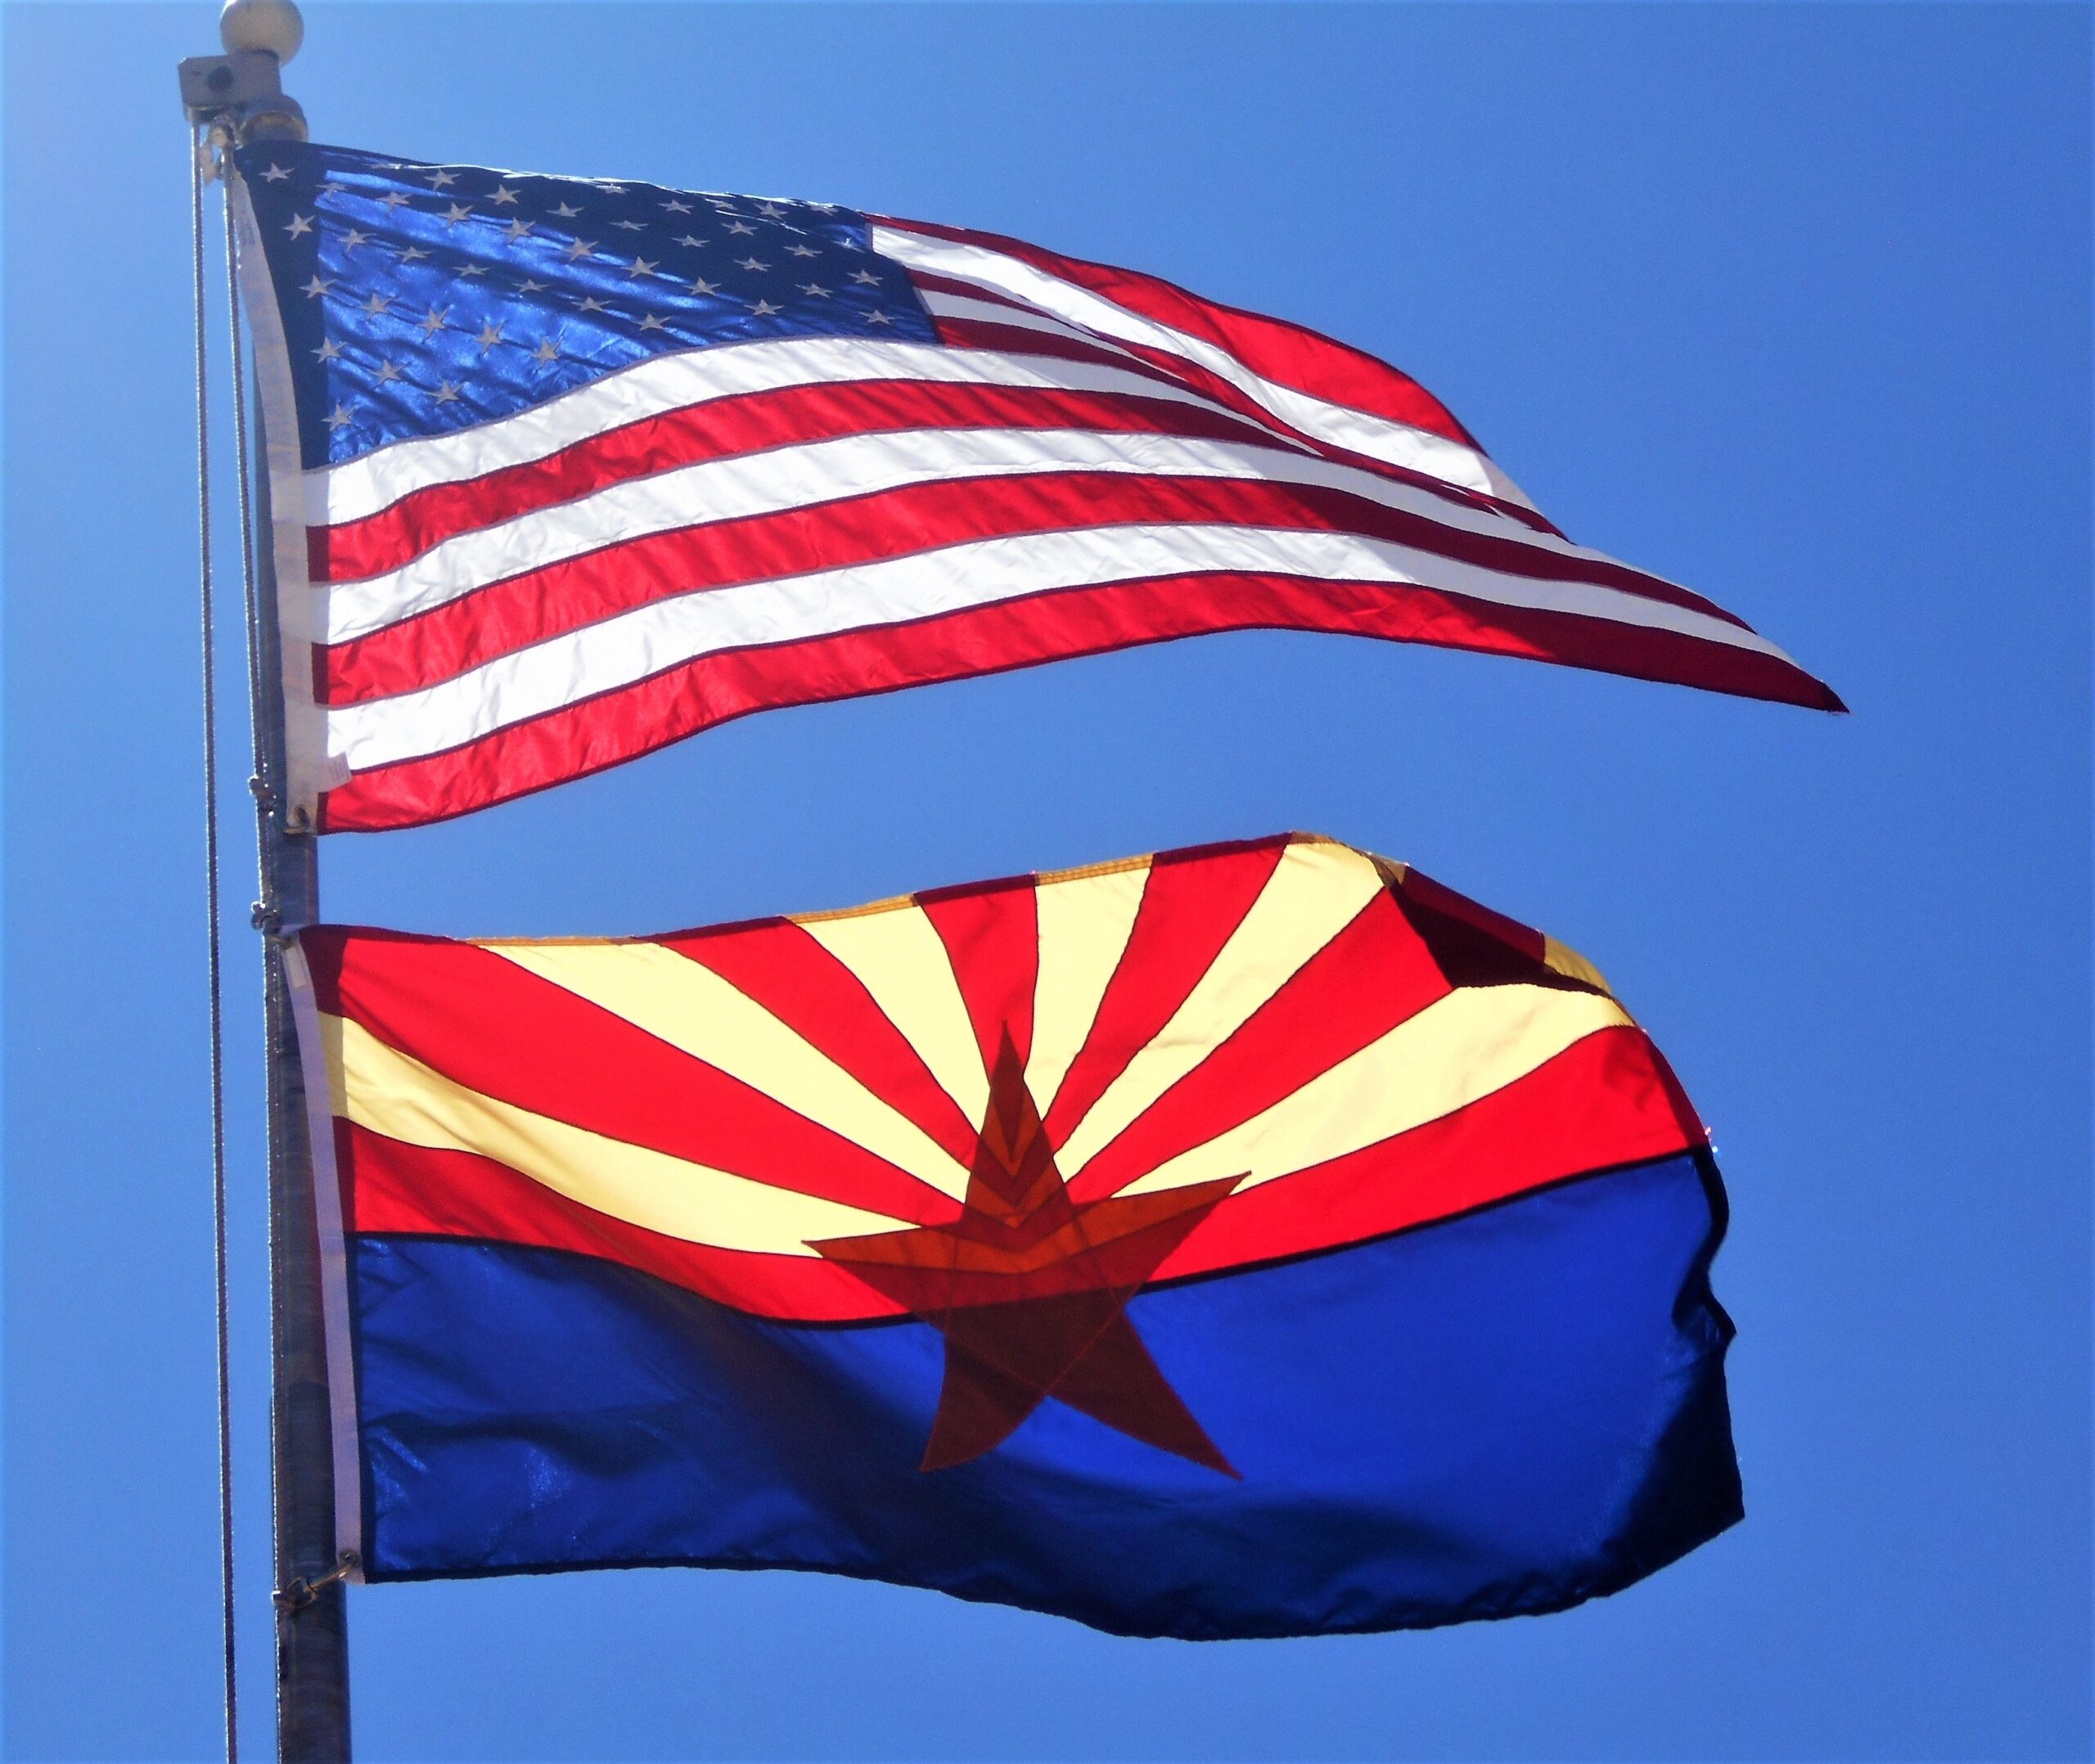 american flag flown with the state of arizona flag